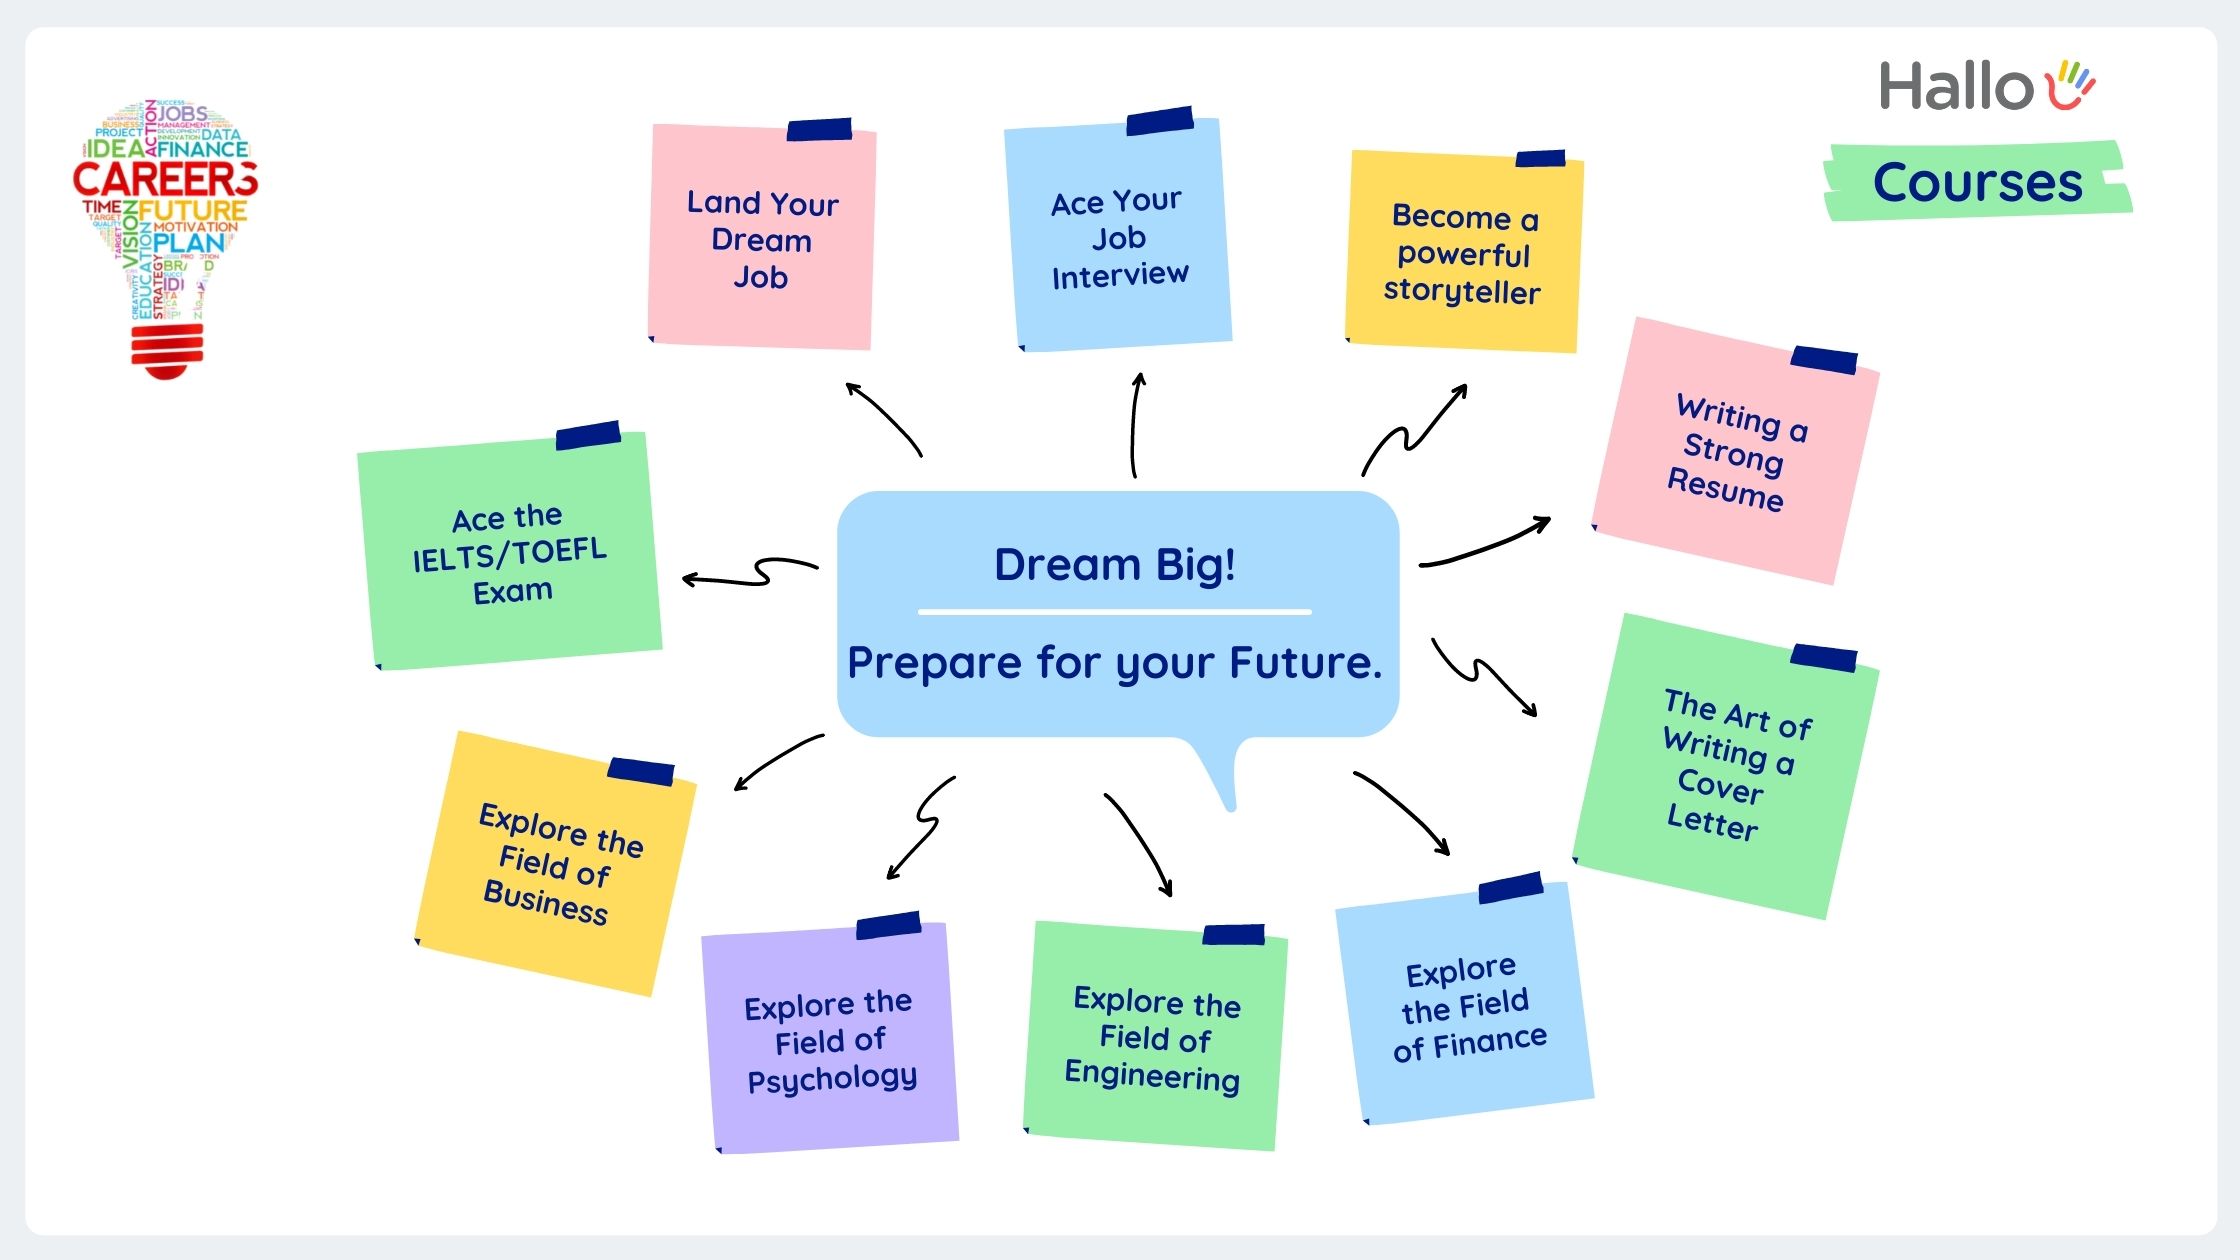 Dream Big and prepare for your future for English Second Language Speakers. Hallo offers Live Online English courses like finding your dream job, ace your job interview, become a powerful storyteller, write a resume and cover letter, explore the fields of finance, Engineering, psychology and business and IELTS/TOEFL prep course.